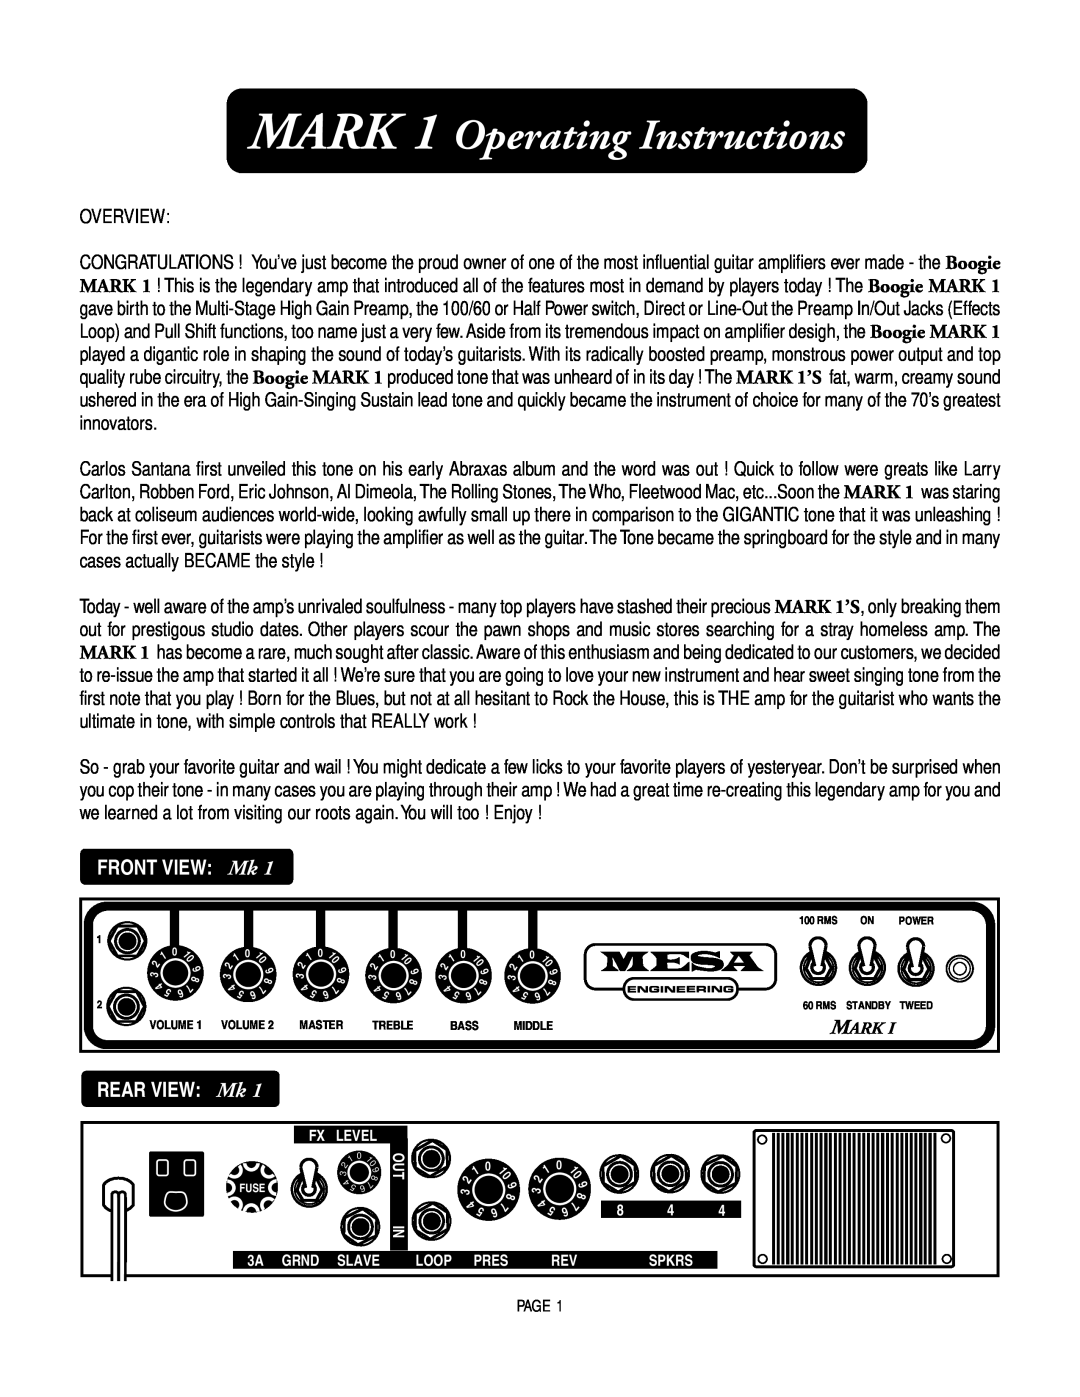 Mesa/Boogie owner manual FRONT VIEW Mk, REAR VIEW Mk, MARK 1 Operating Instructions, Overview, Mark 